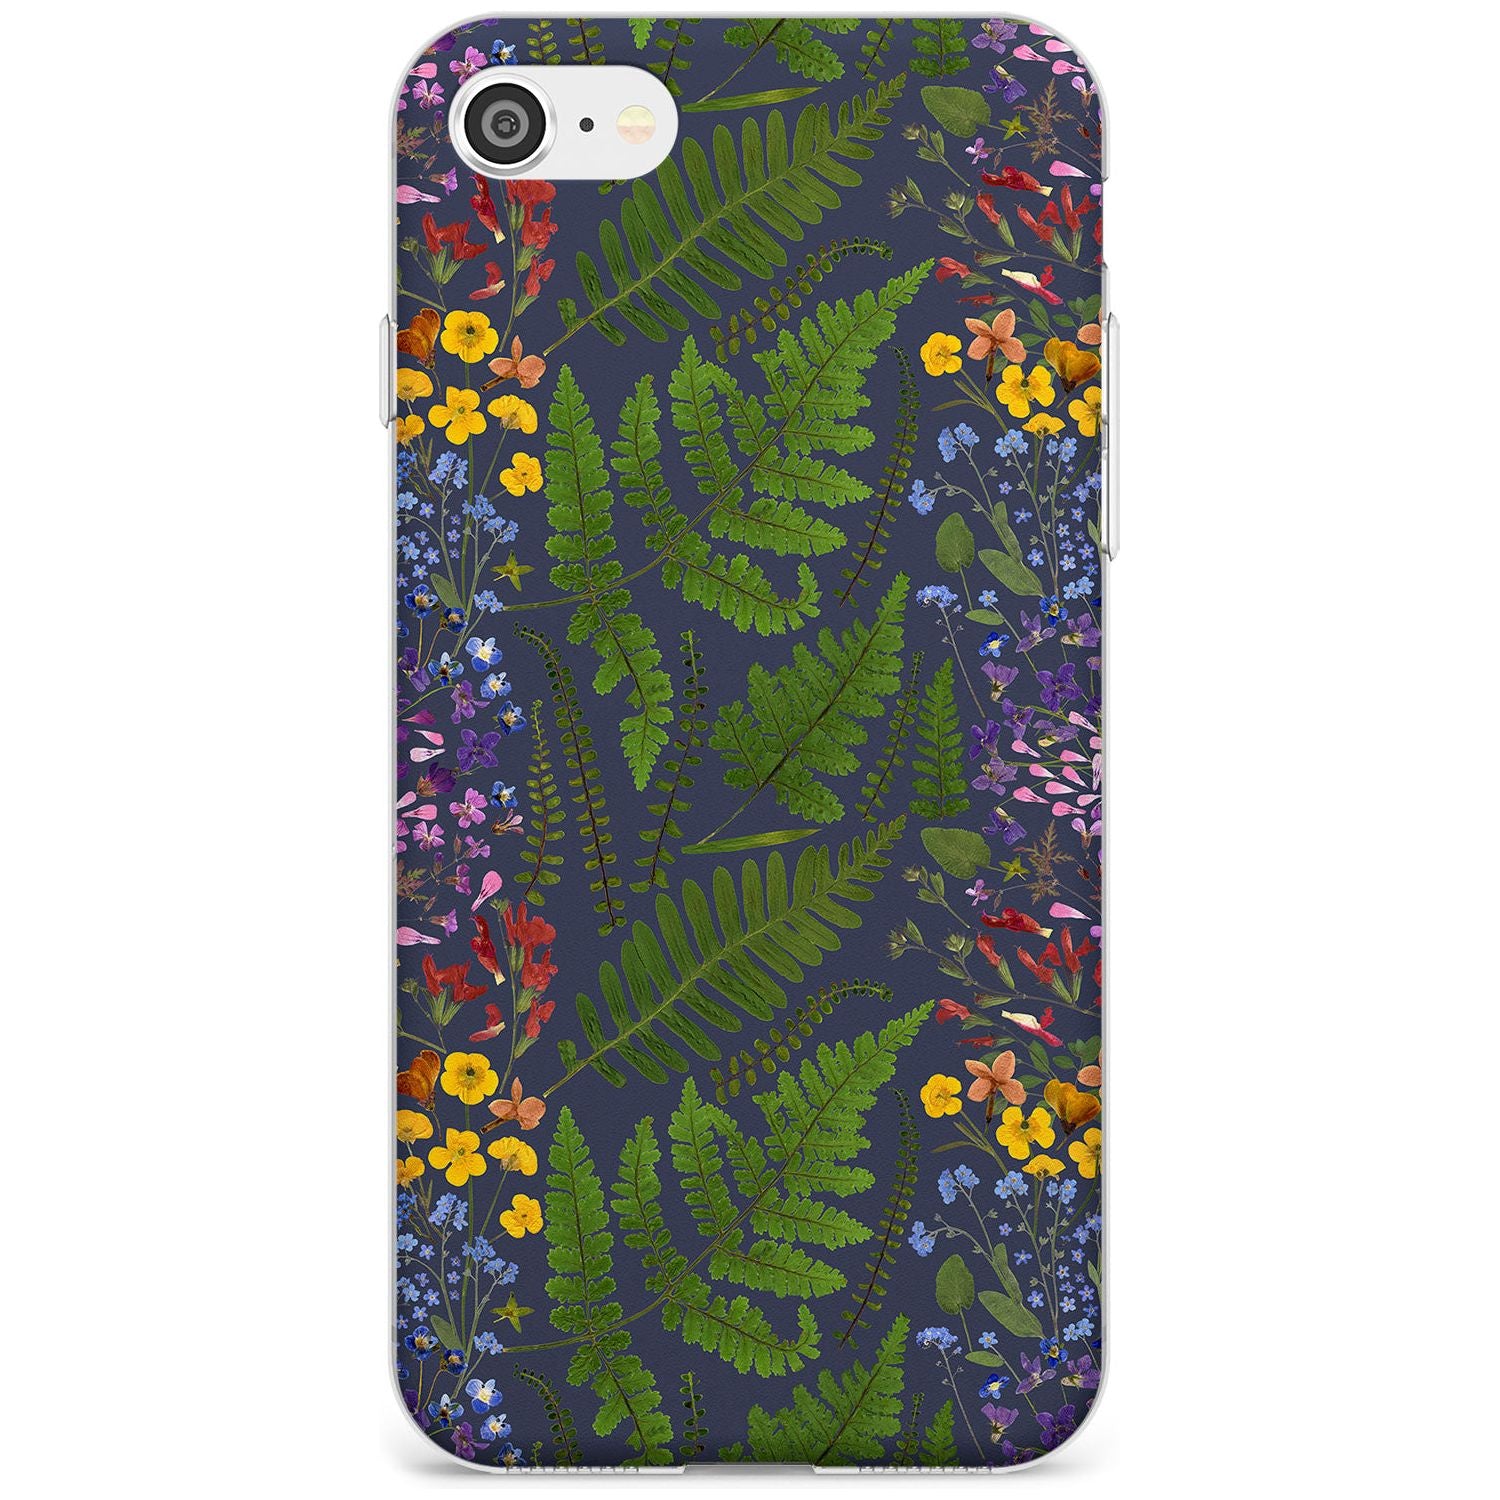 Busy Floral and Fern Design - Navy Slim TPU Phone Case for iPhone SE 8 7 Plus